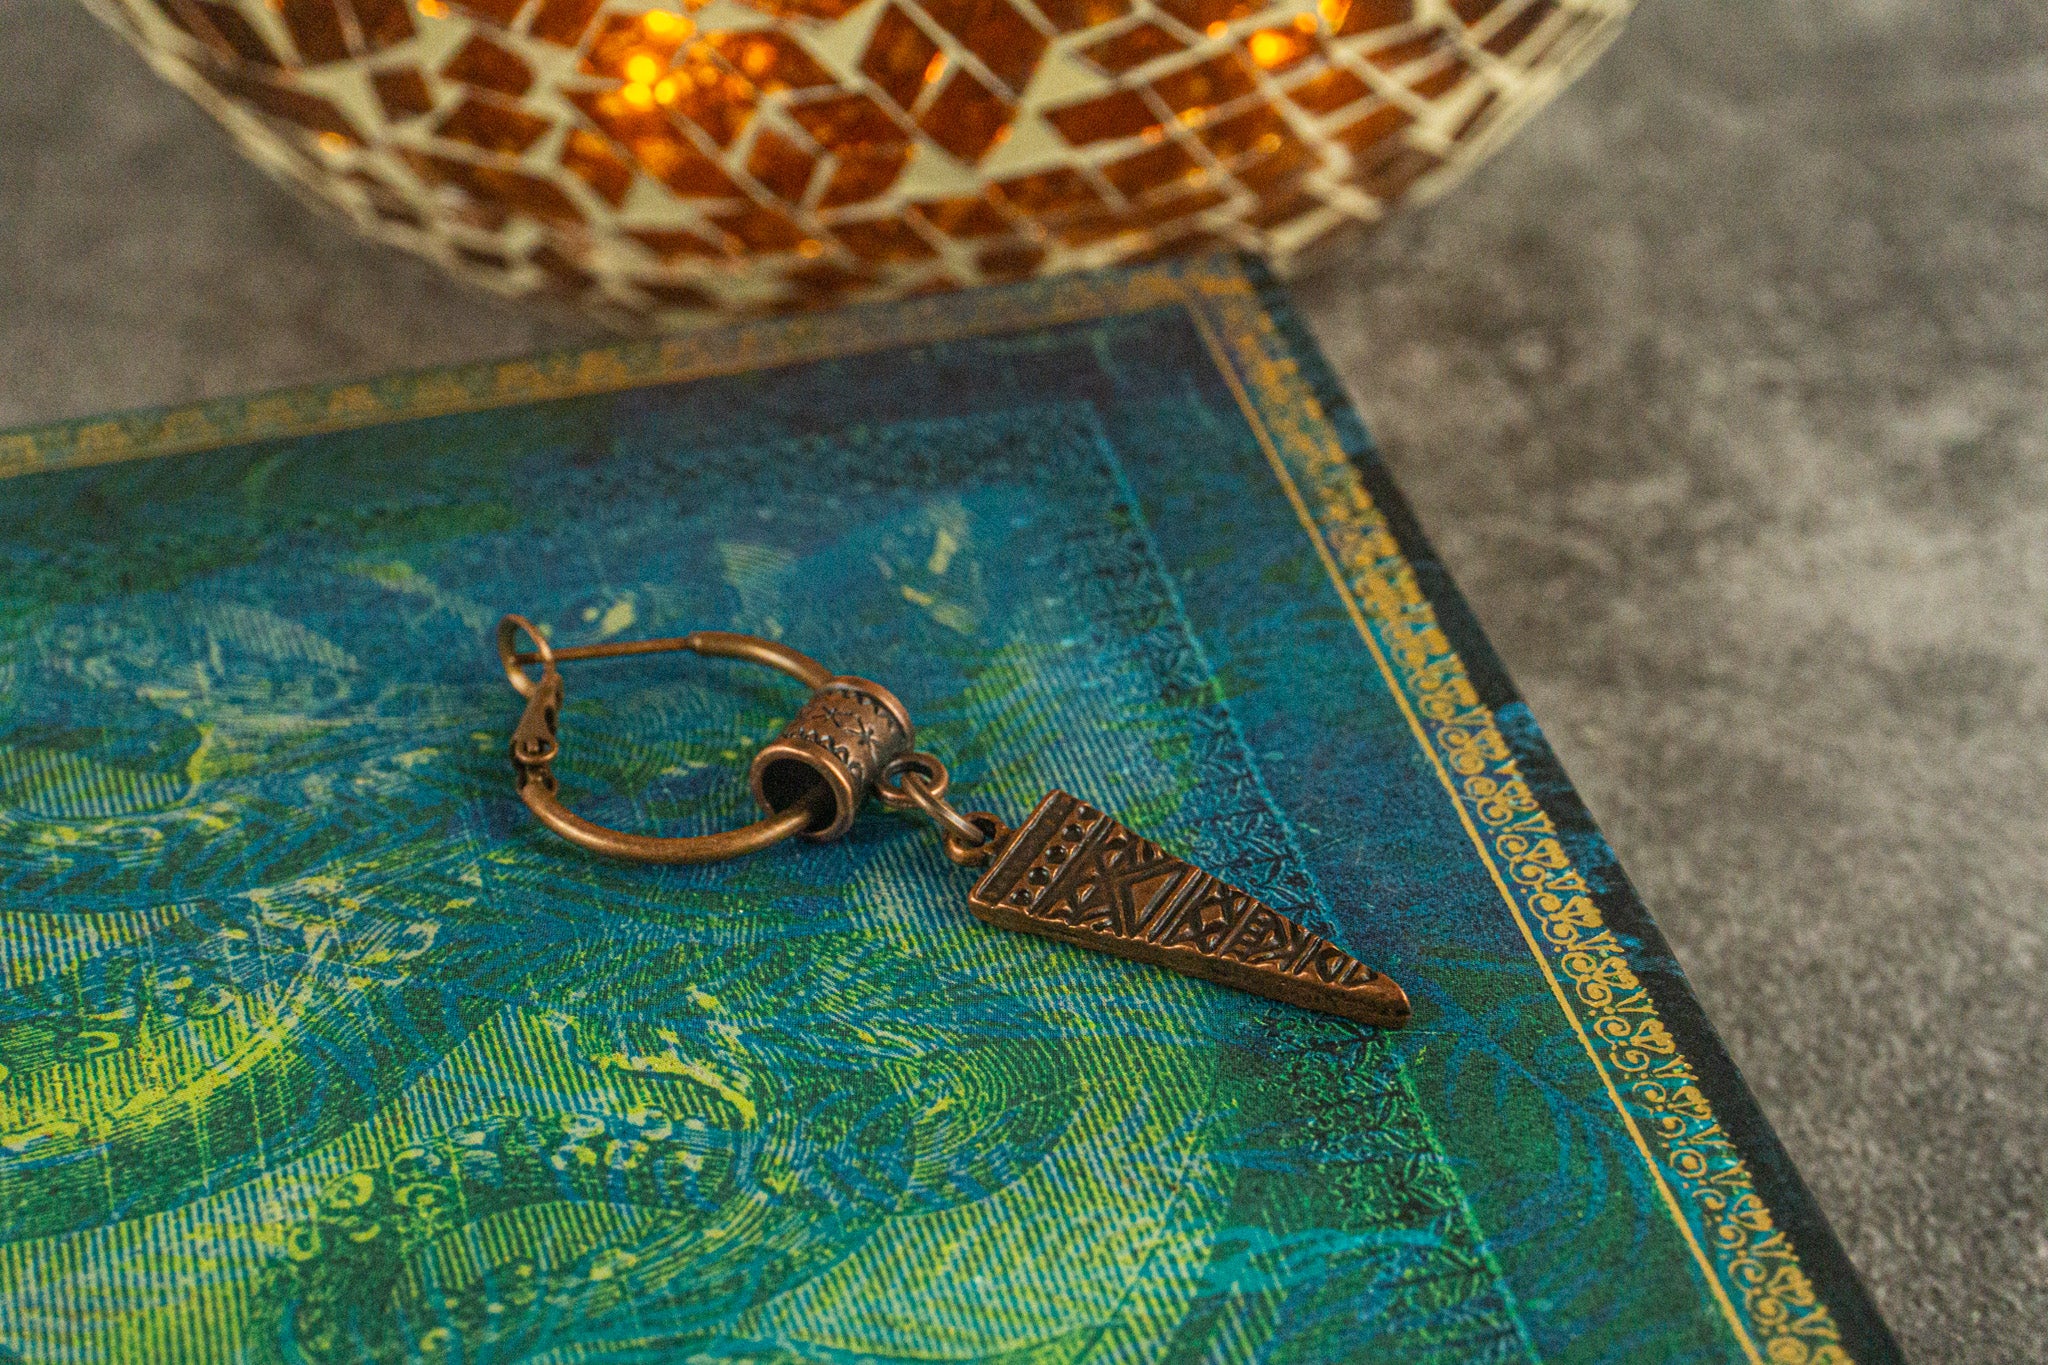 single copper hoop earring with a copper triangle tribal charm pendant- wander jewellery